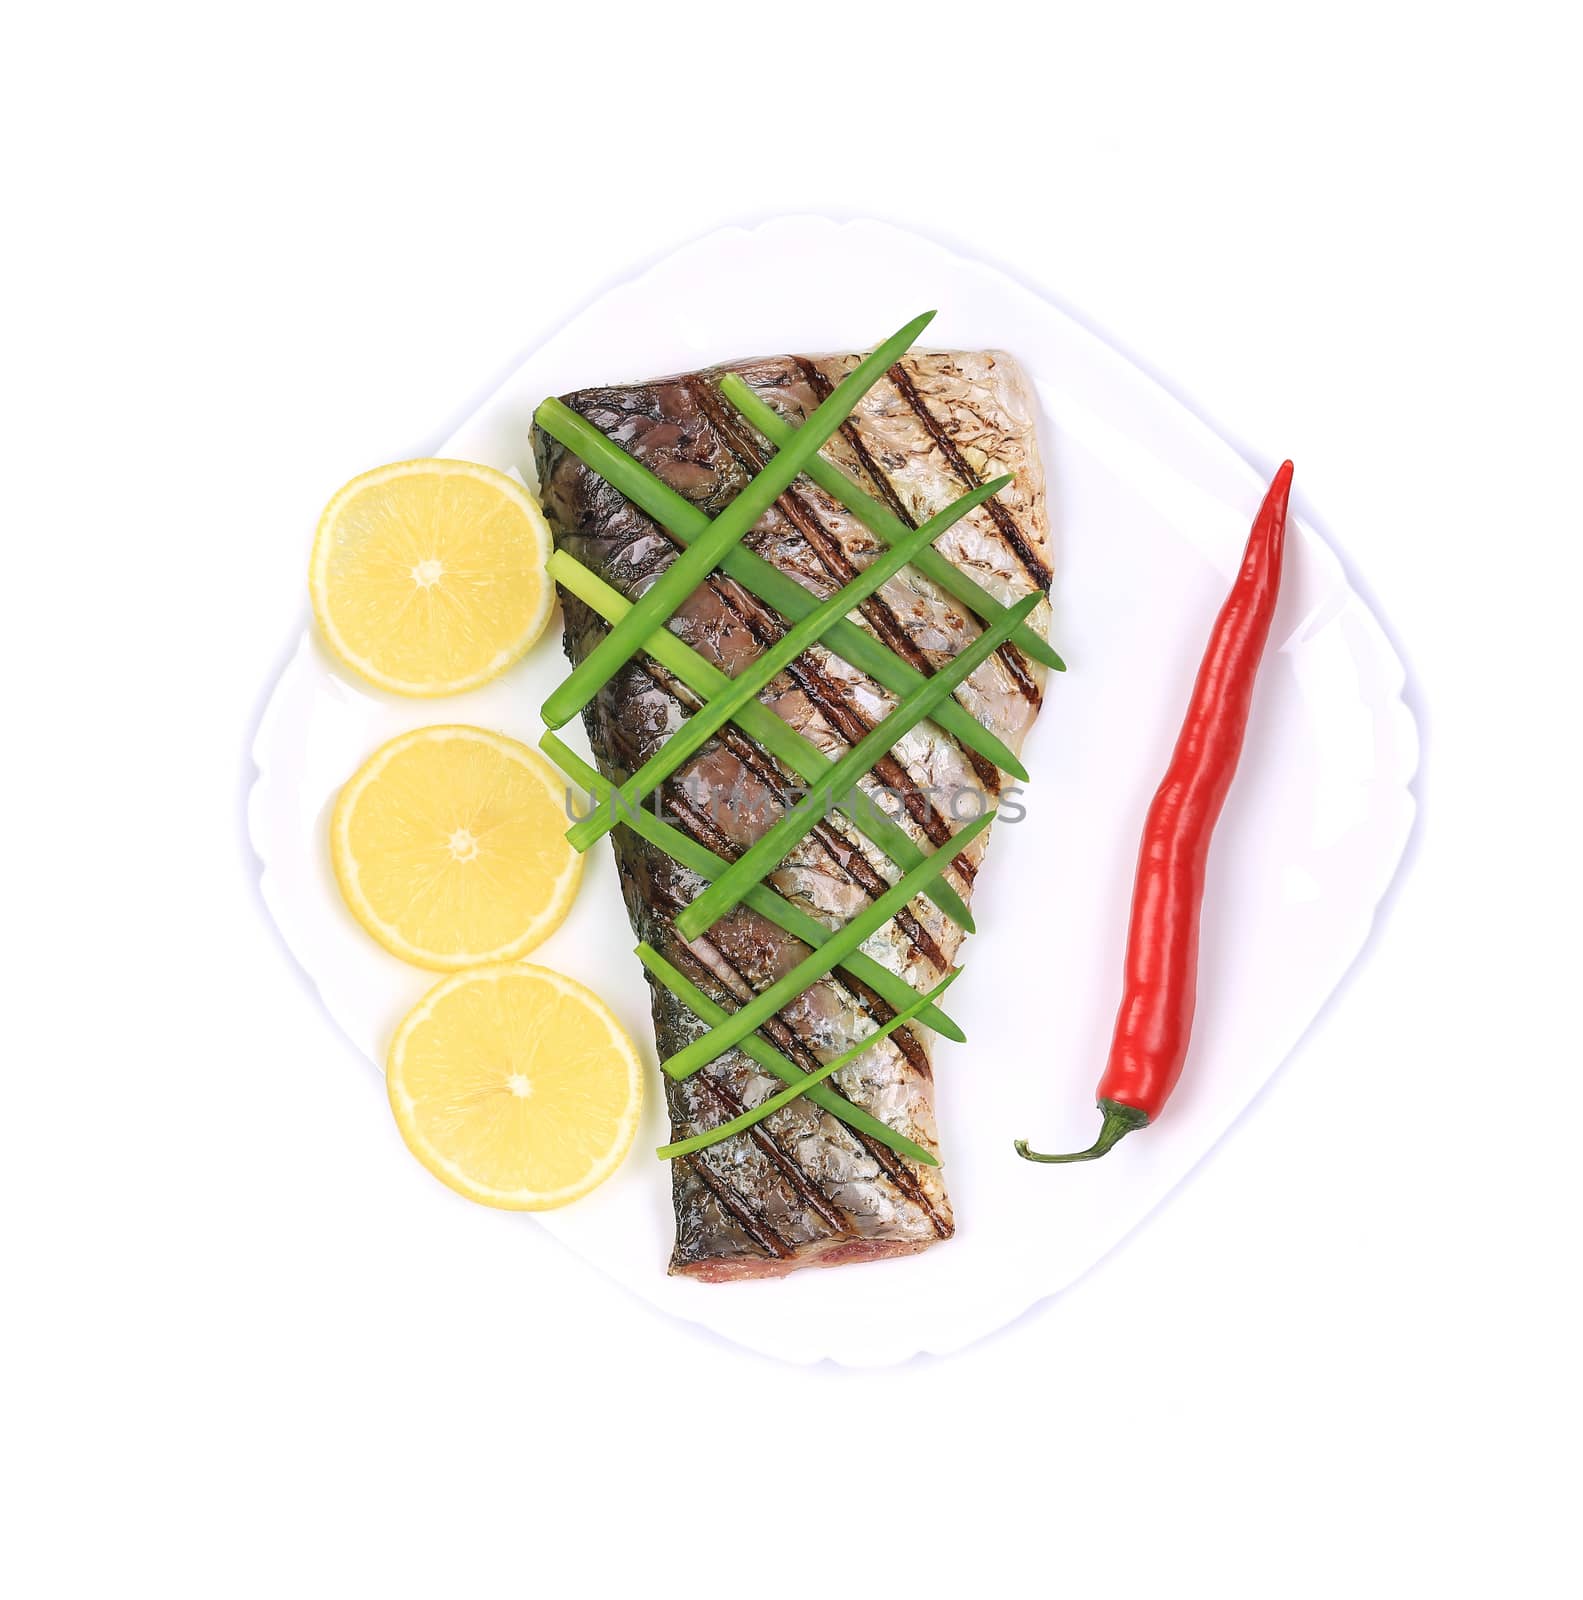 Grilled carp fillet on plate with onion and lemon. Isolated on a white background.